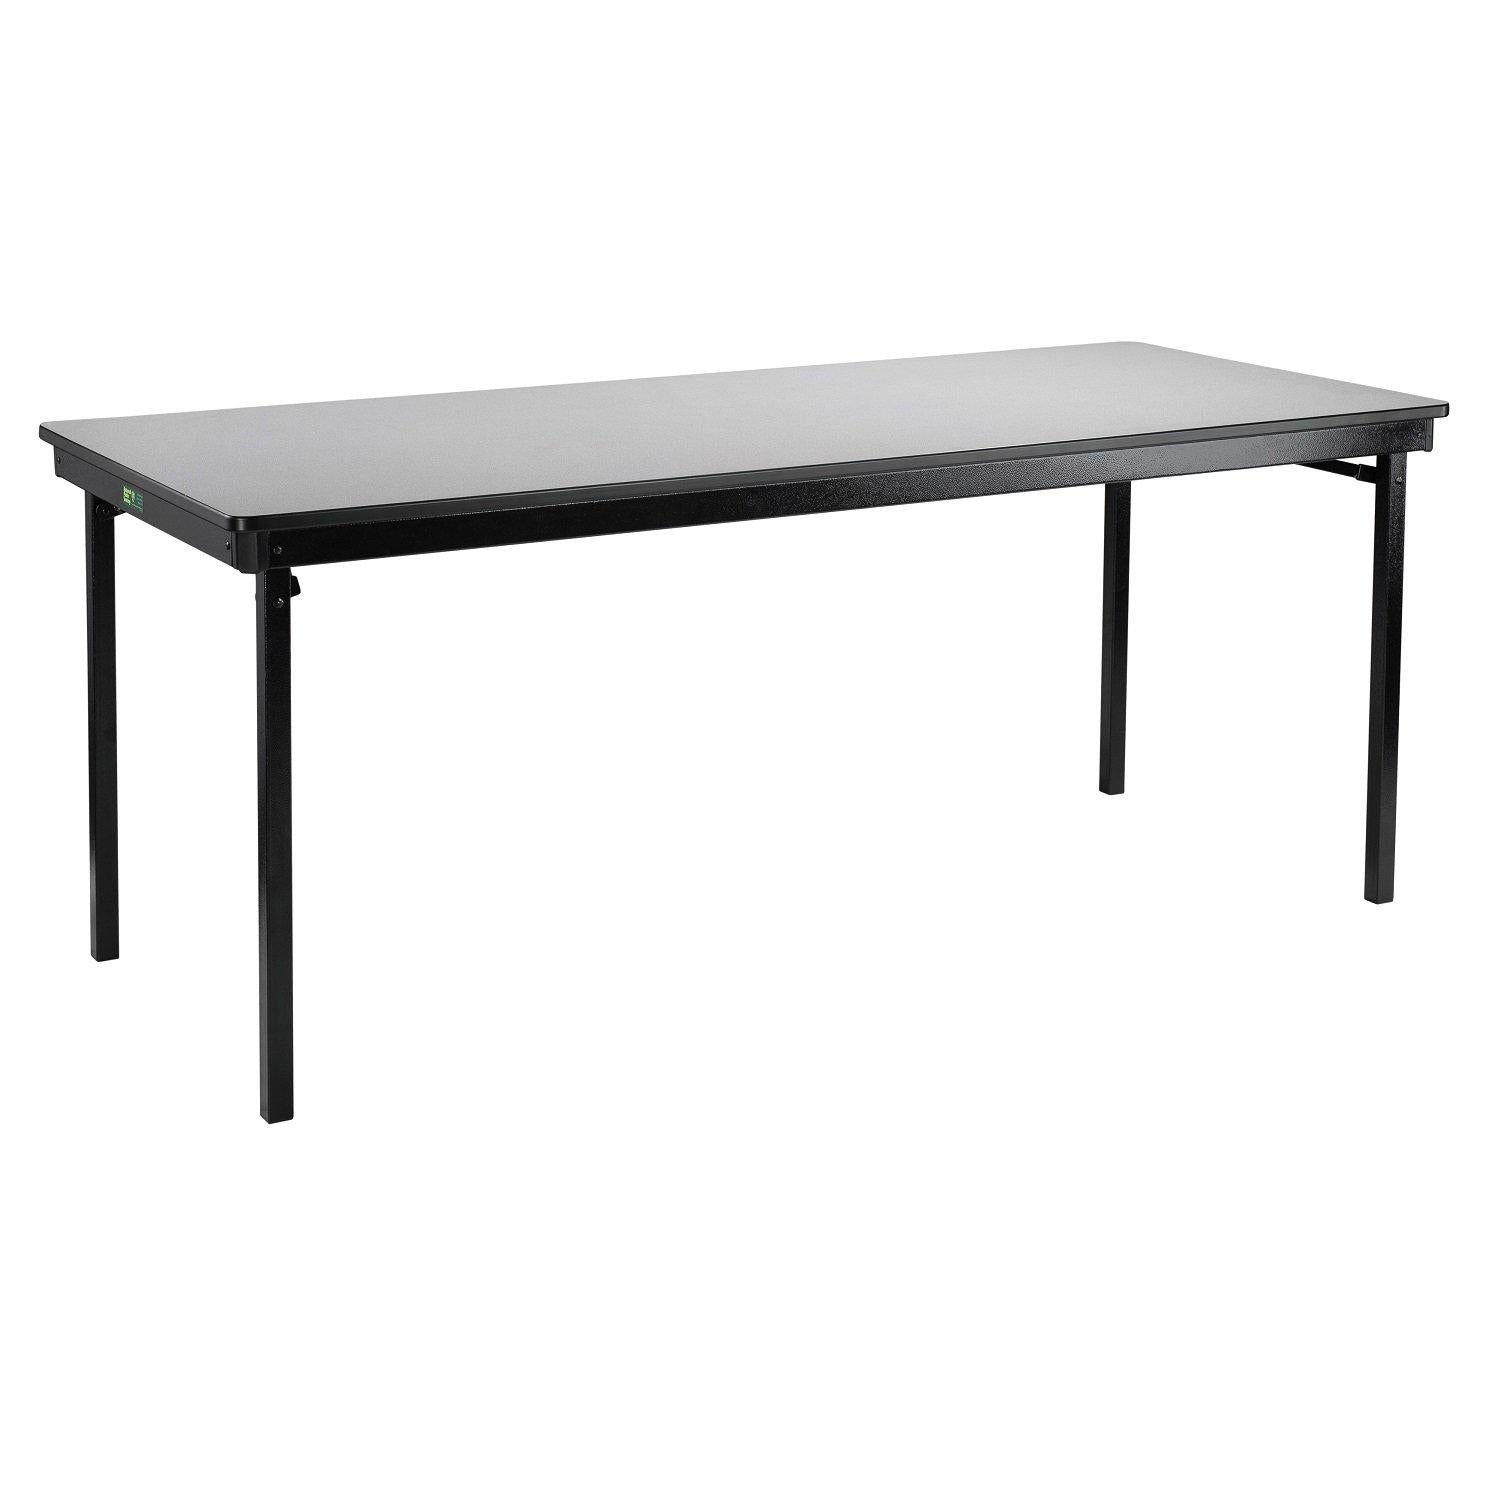 Max Seating Folding Table, 36" x 72", Premium Plywood Core, High Pressure Laminate Top with PVC Edge Banding